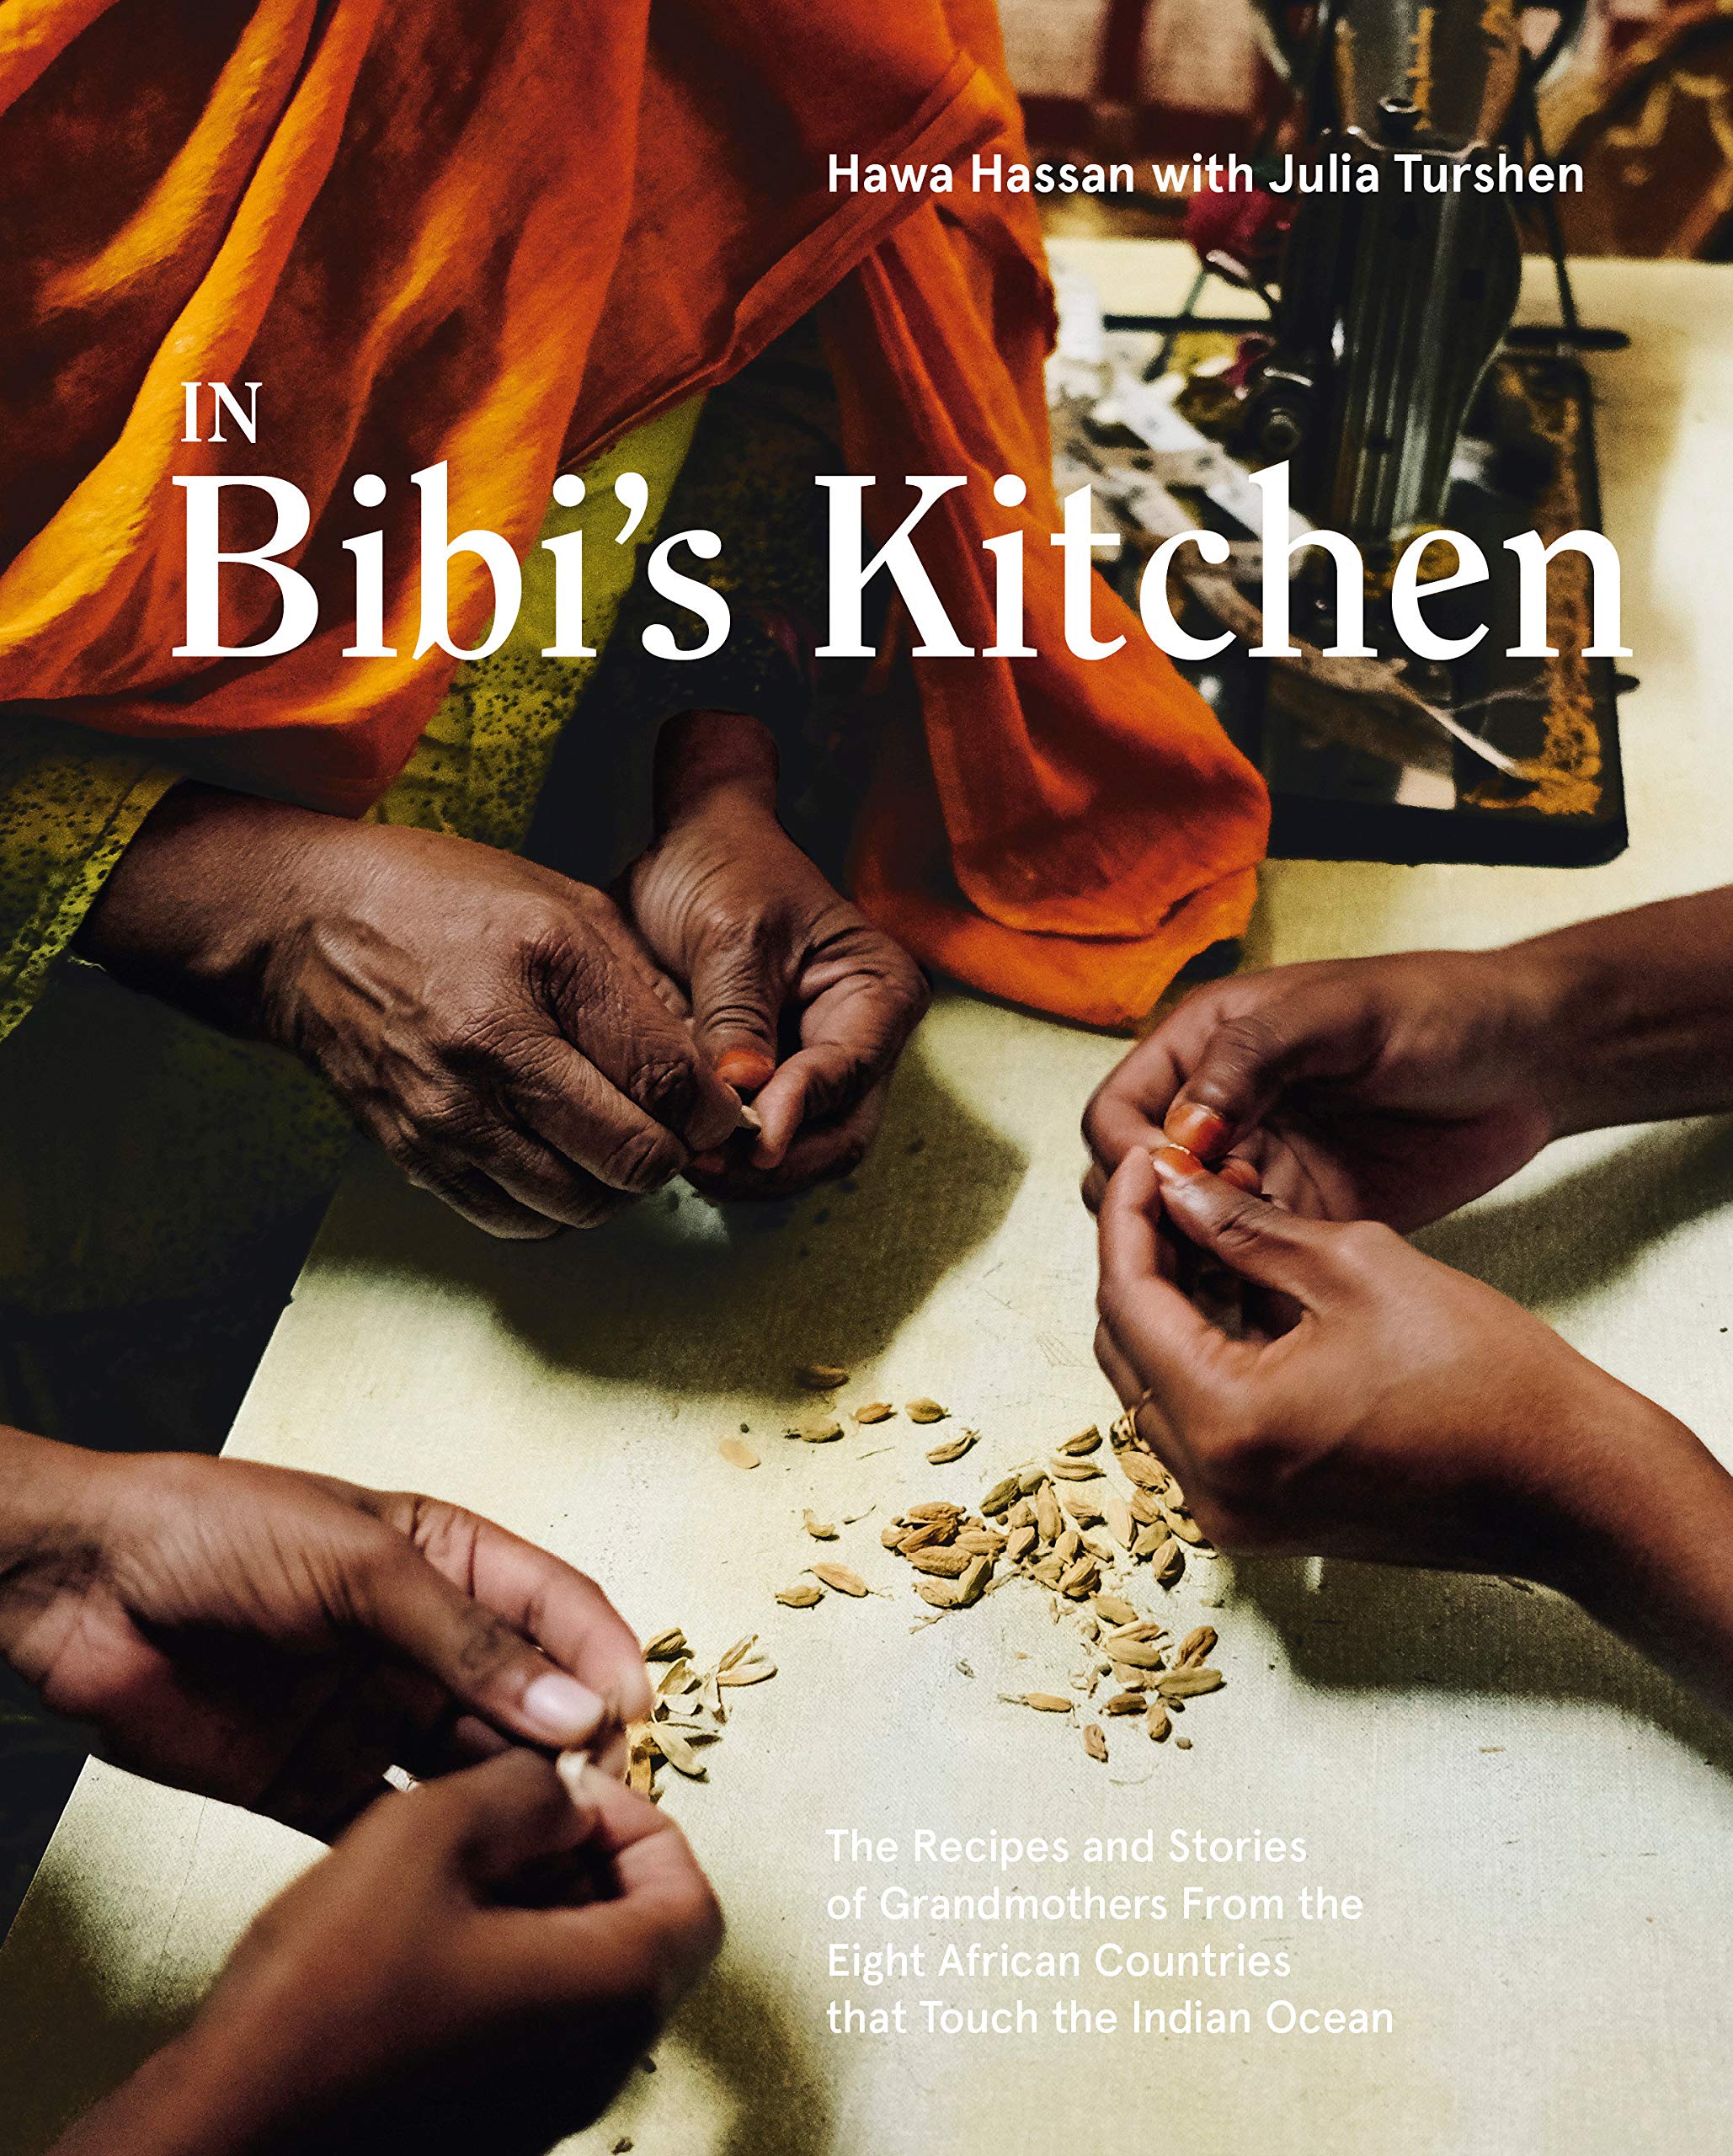 a graphic of the covers of In Bibi's Kitchen: The Recipes and Stories of Grandmothers from the Eight African Countries that Touch the Indian Ocean by Hawa Hassan